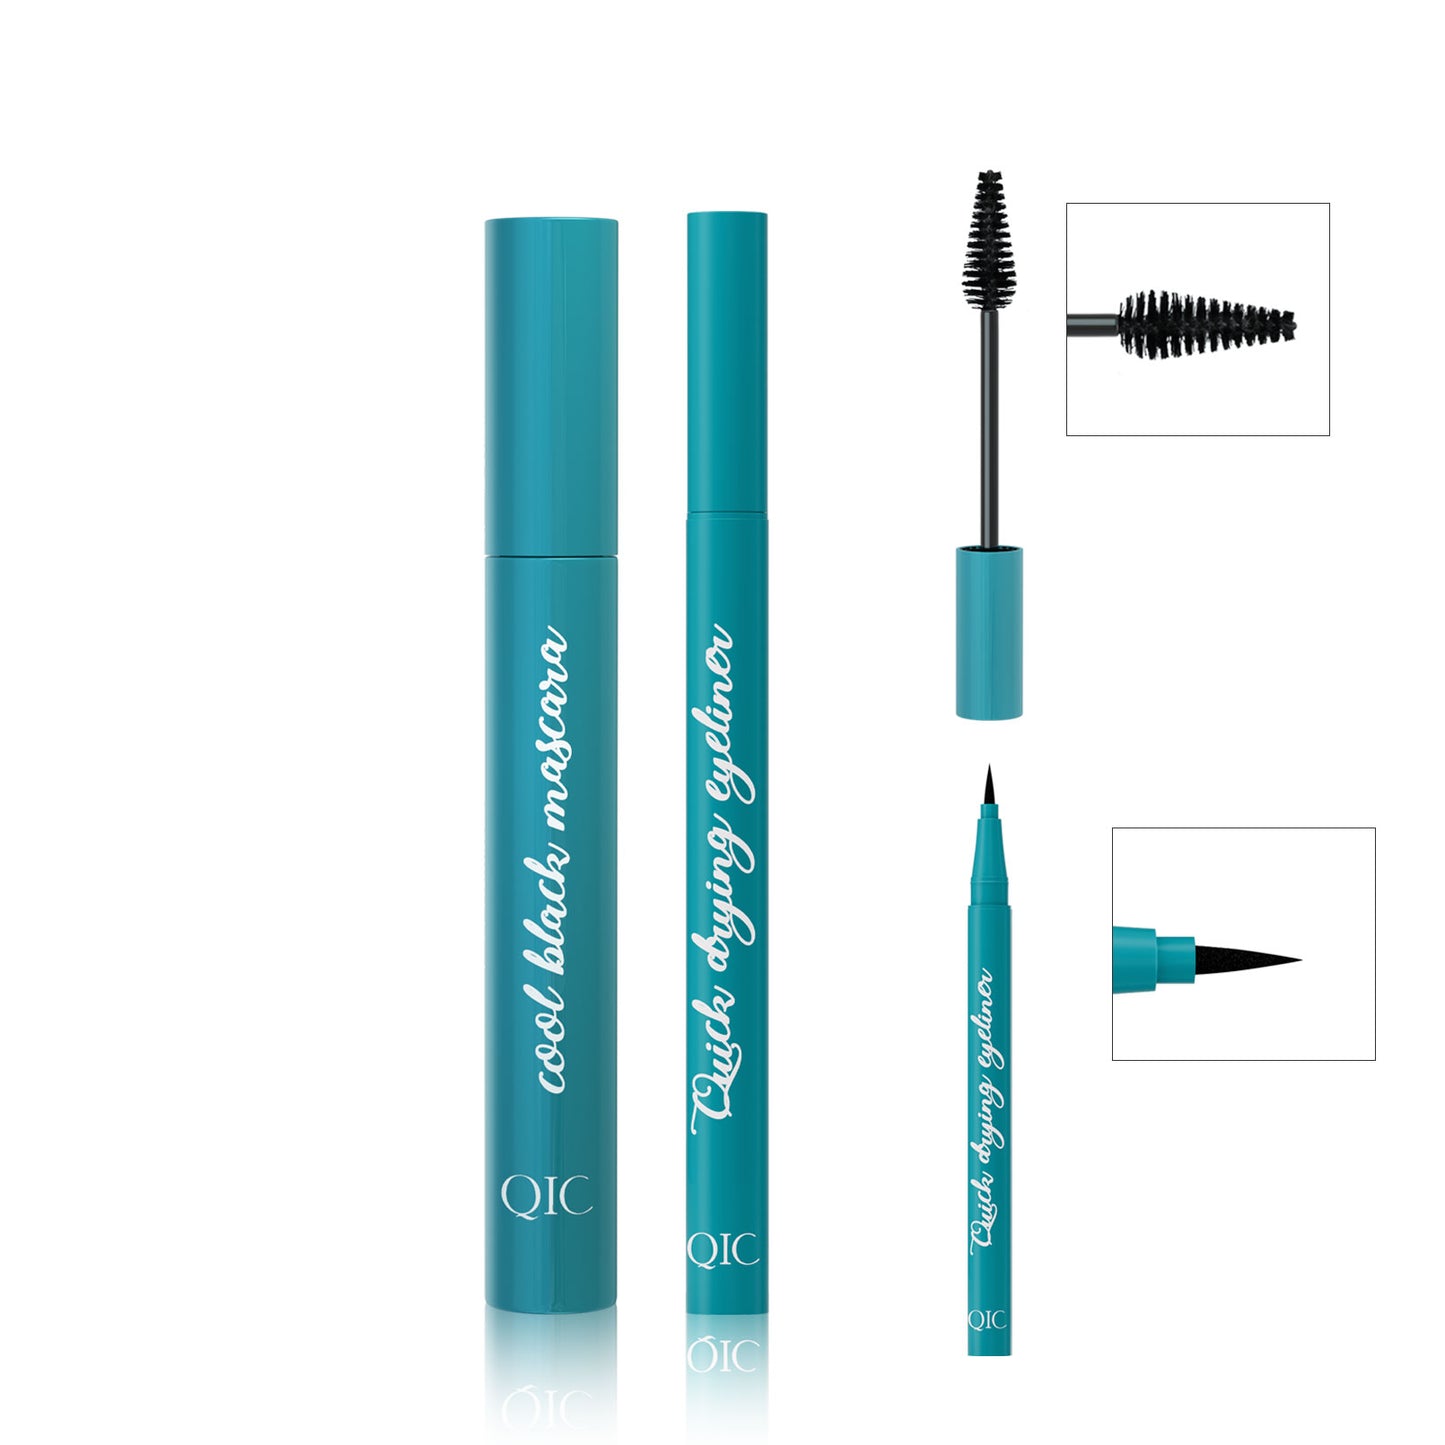 Koroole 2 in 1 Cool Black Mascara and Quick-Drying Eyeliner (set) Curl Smooth